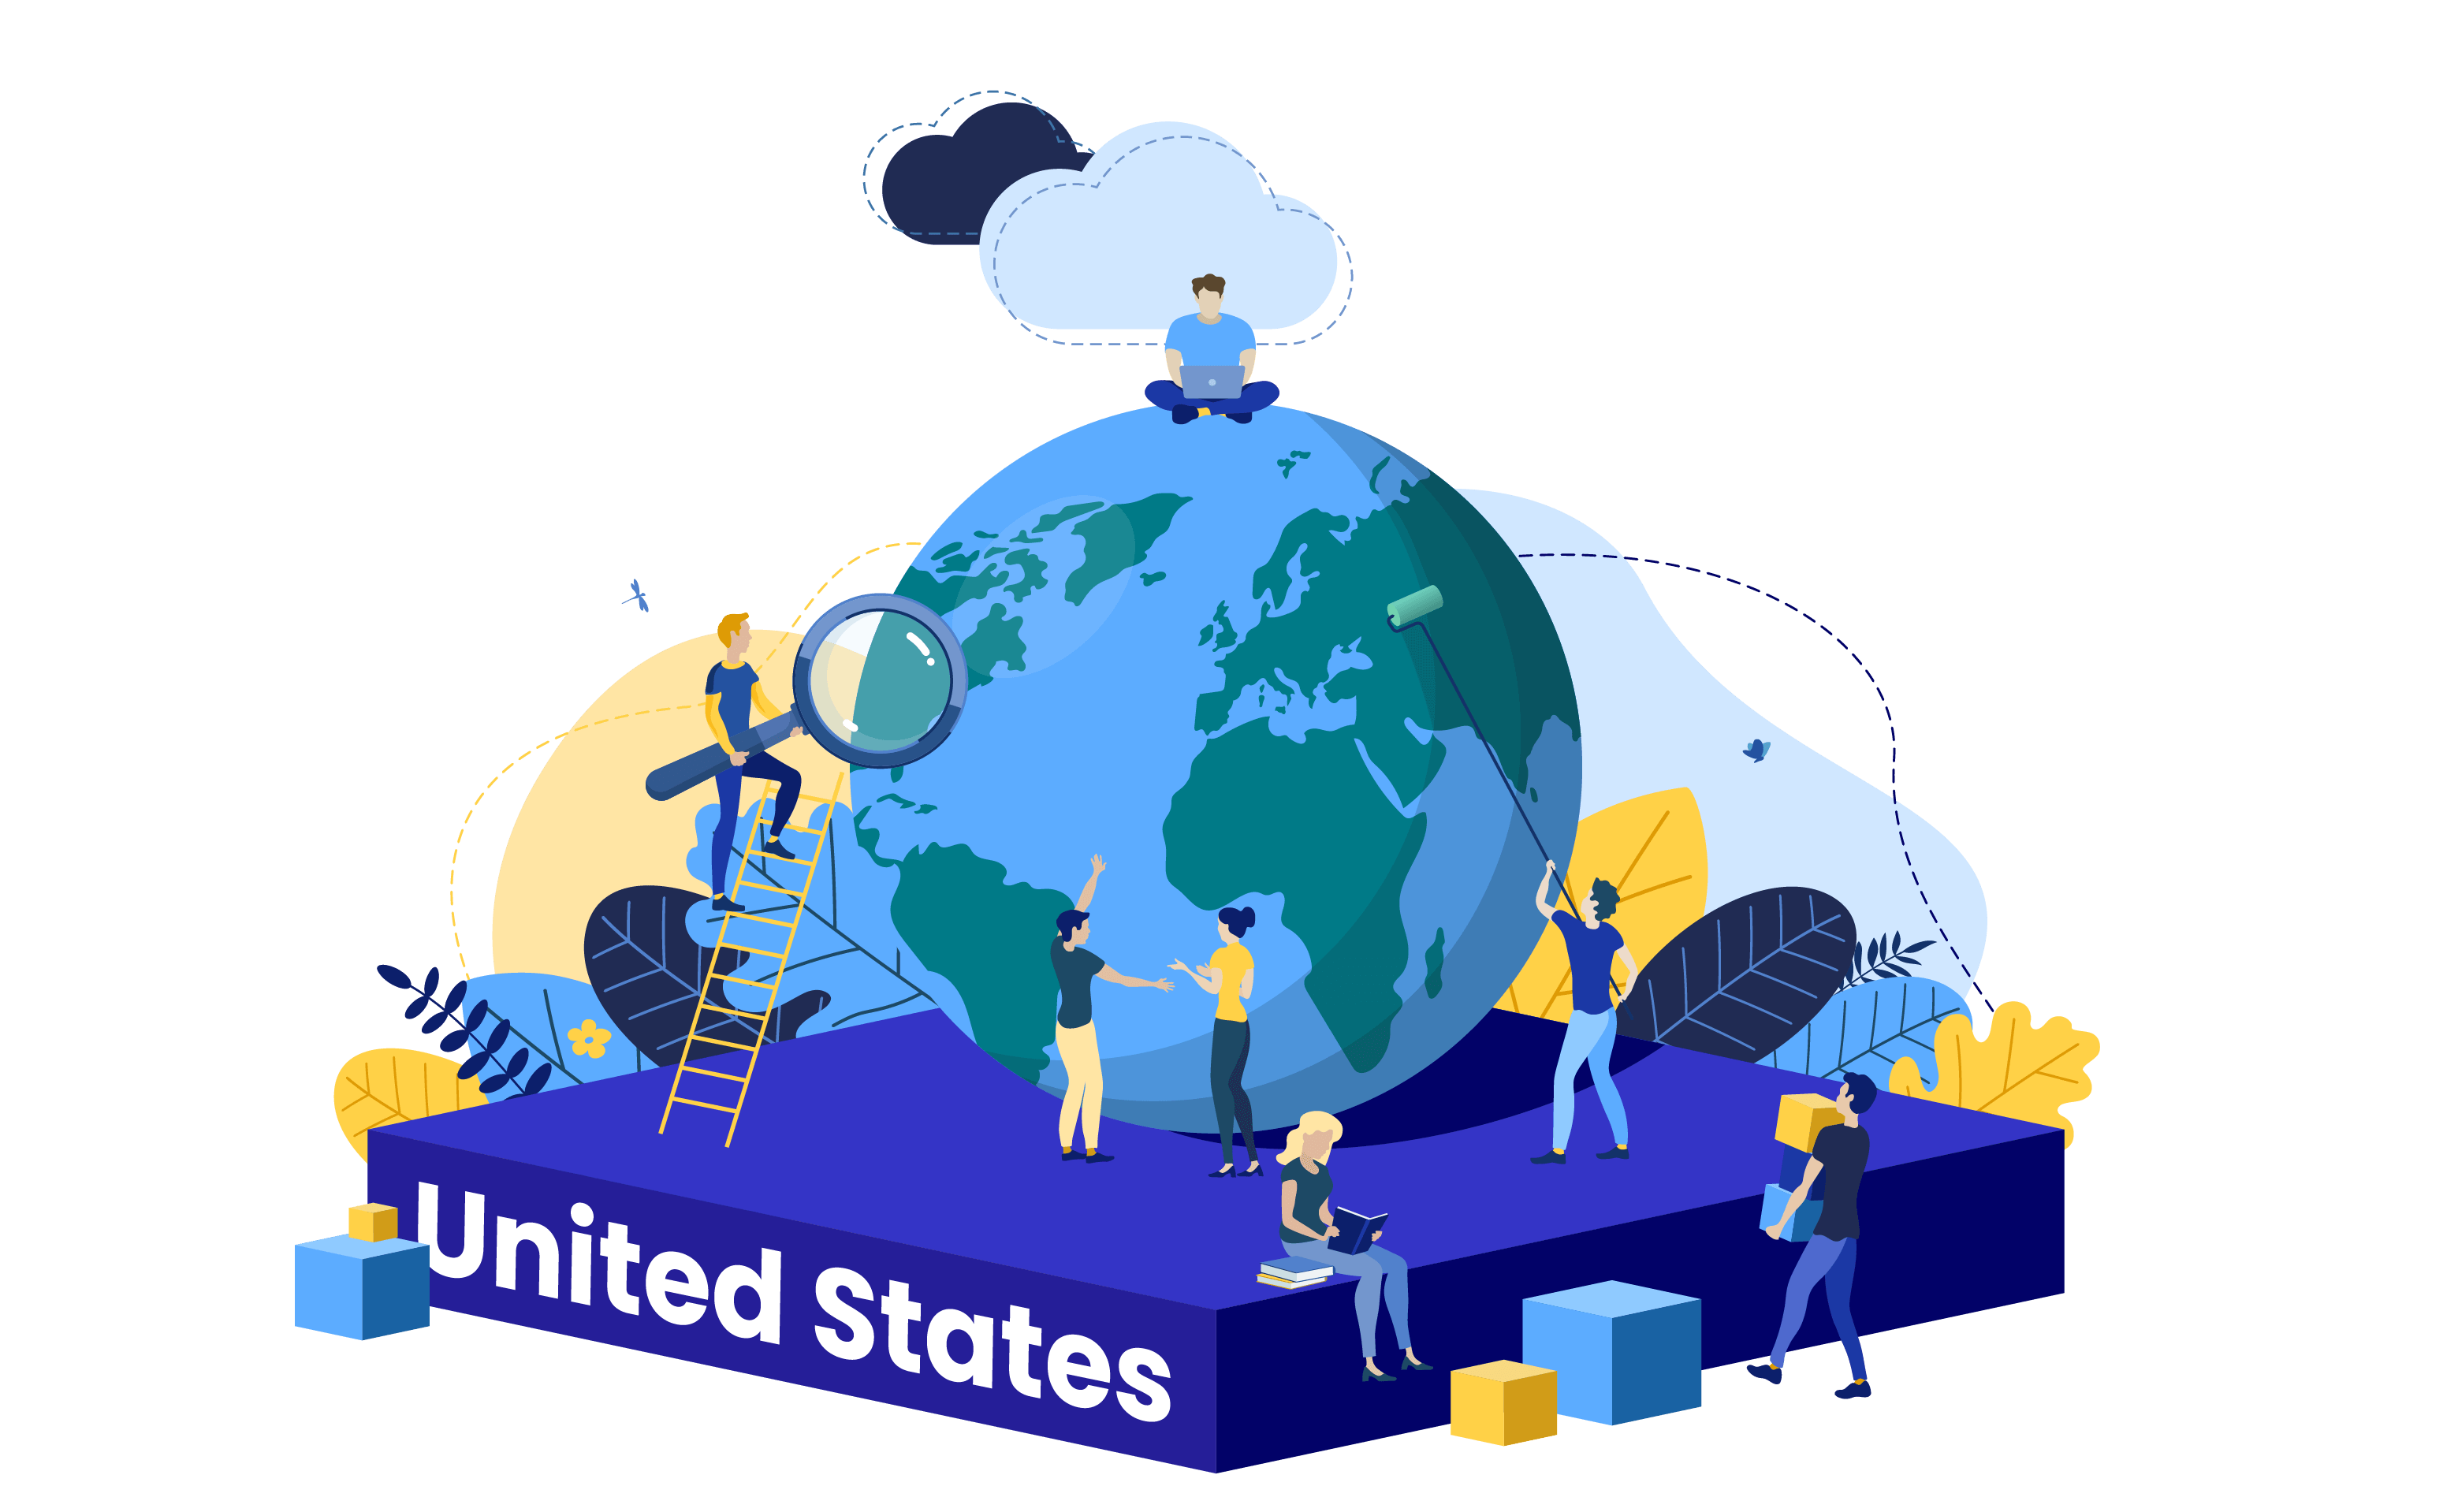 Locations - Web accessibility the United States